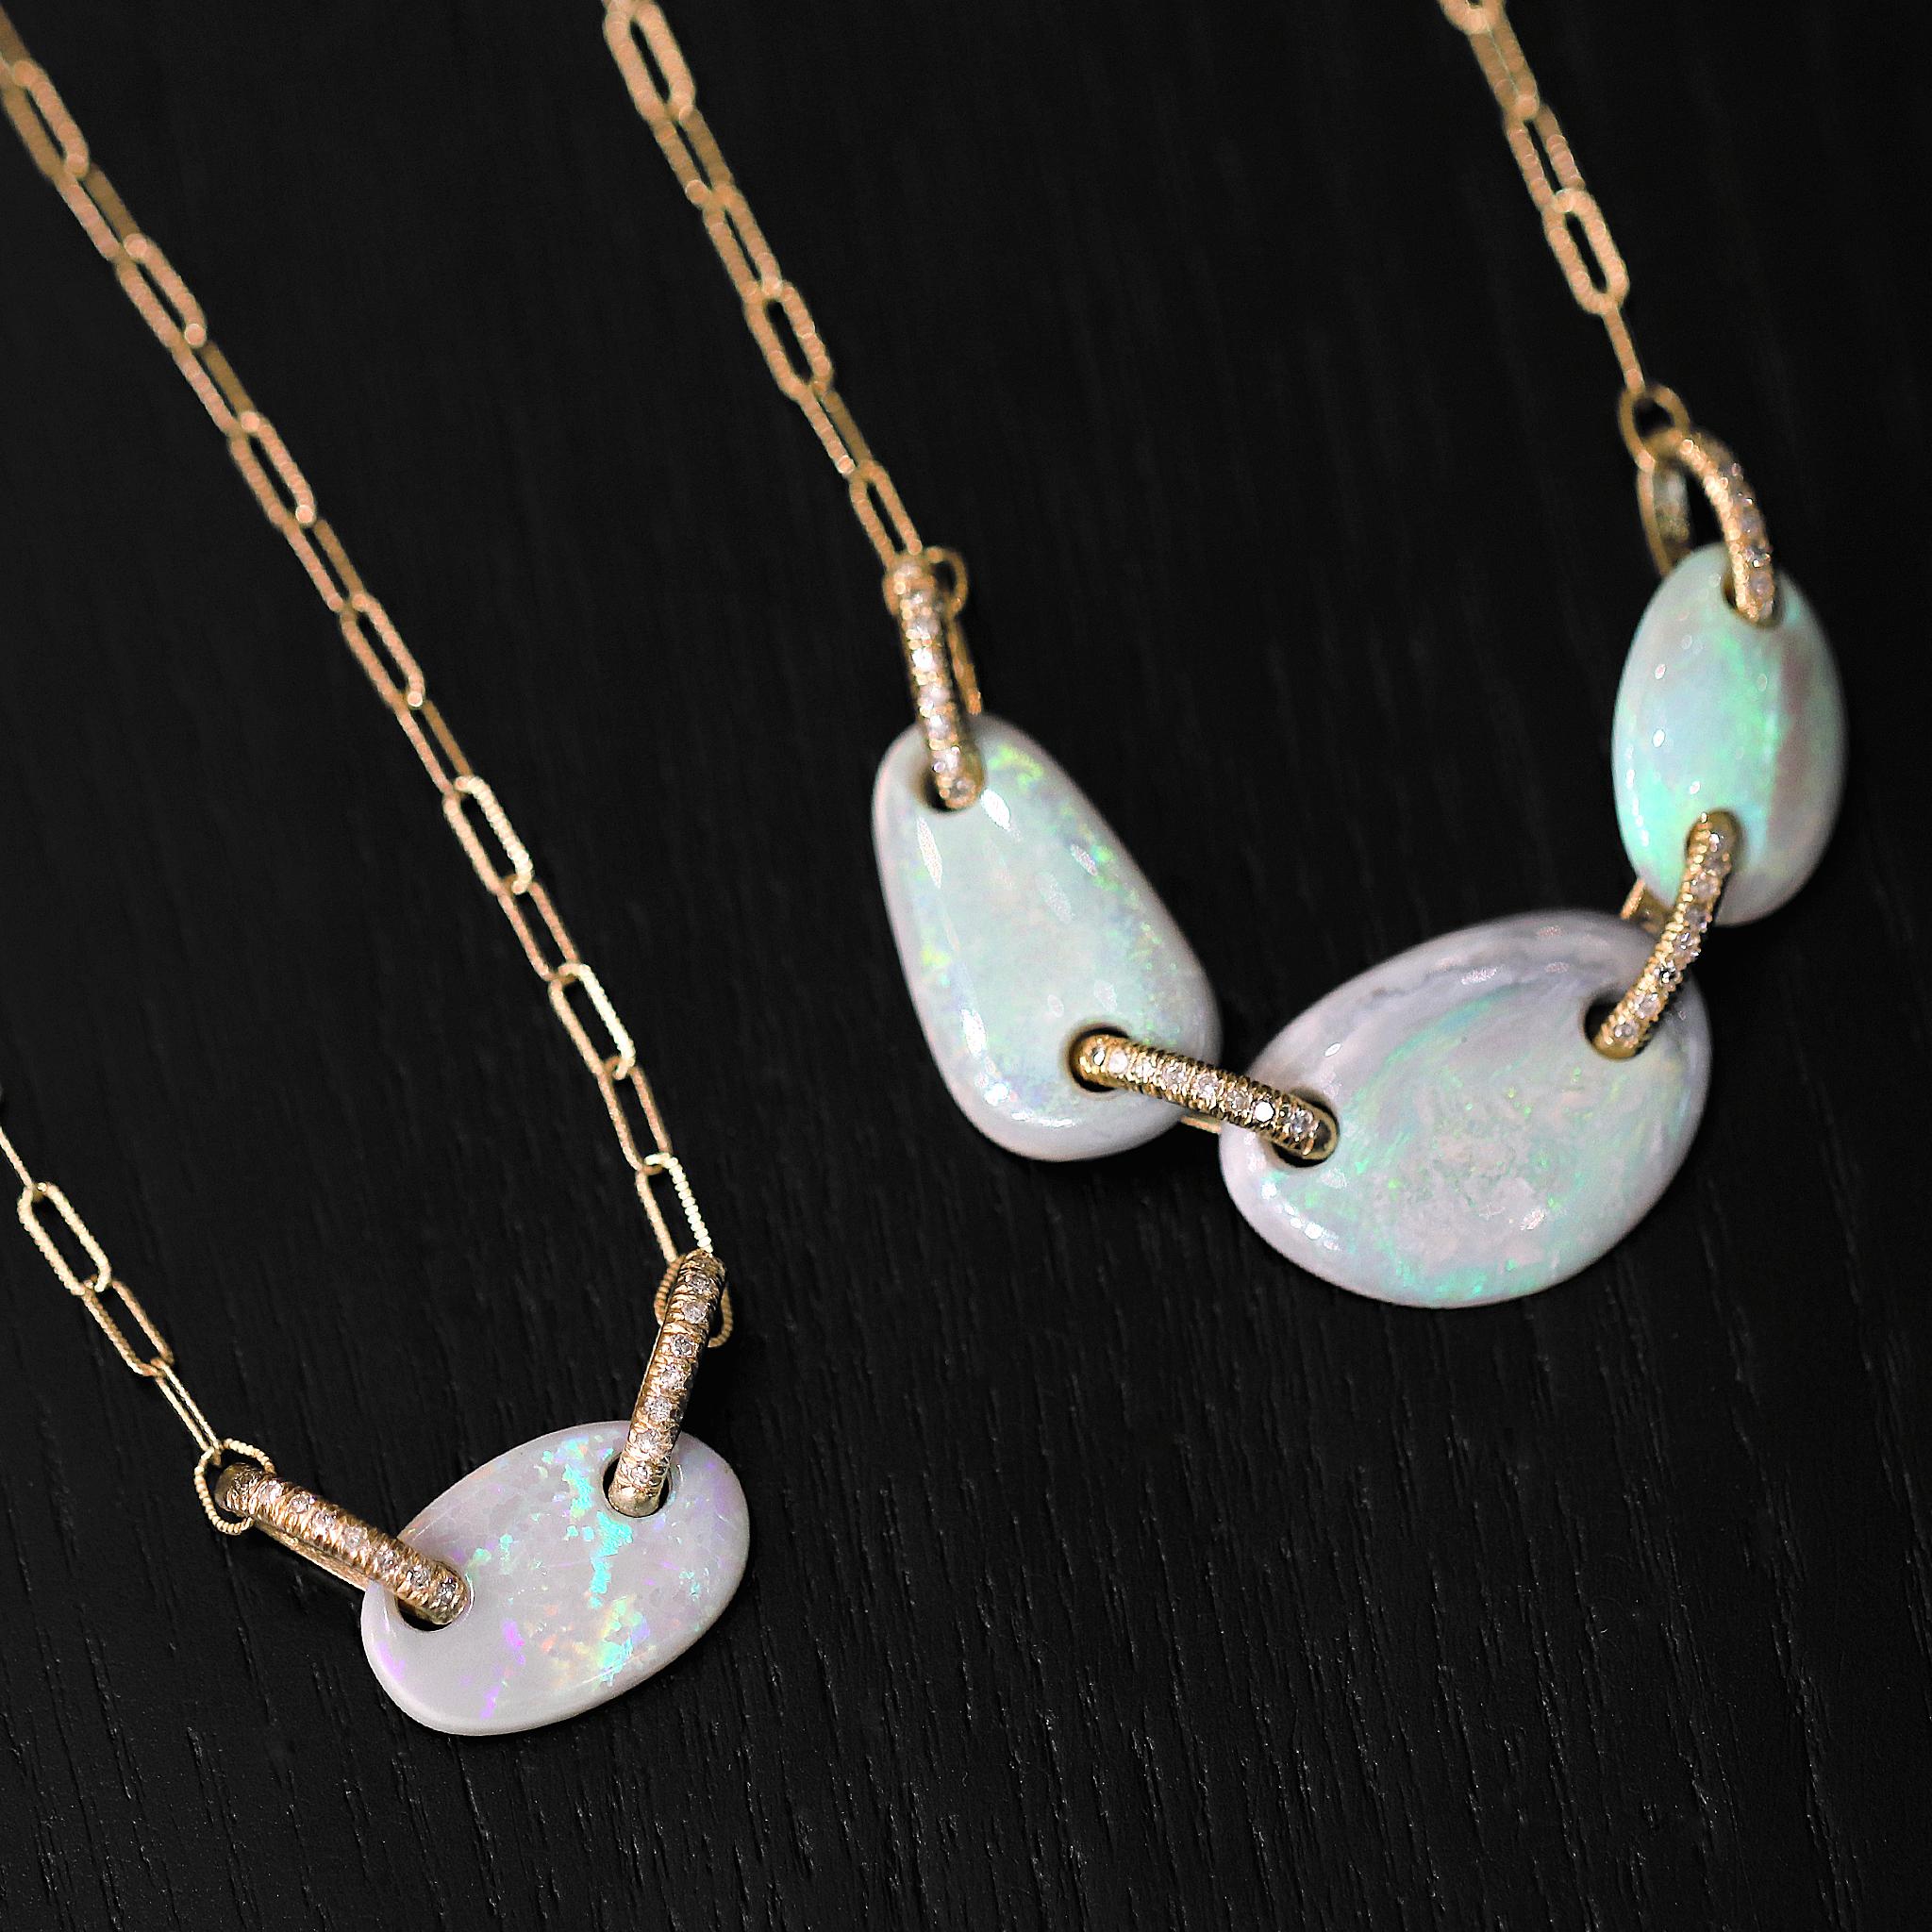 One of a Kind Floating Opal Necklace handmade by jewelry designer Julie Romanenko (Just Jules) featuring a stunning Australian boulder opal flanked by double-sided marquise-shaped round diamond links in 14k yellow gold and finished on a 14k yellow